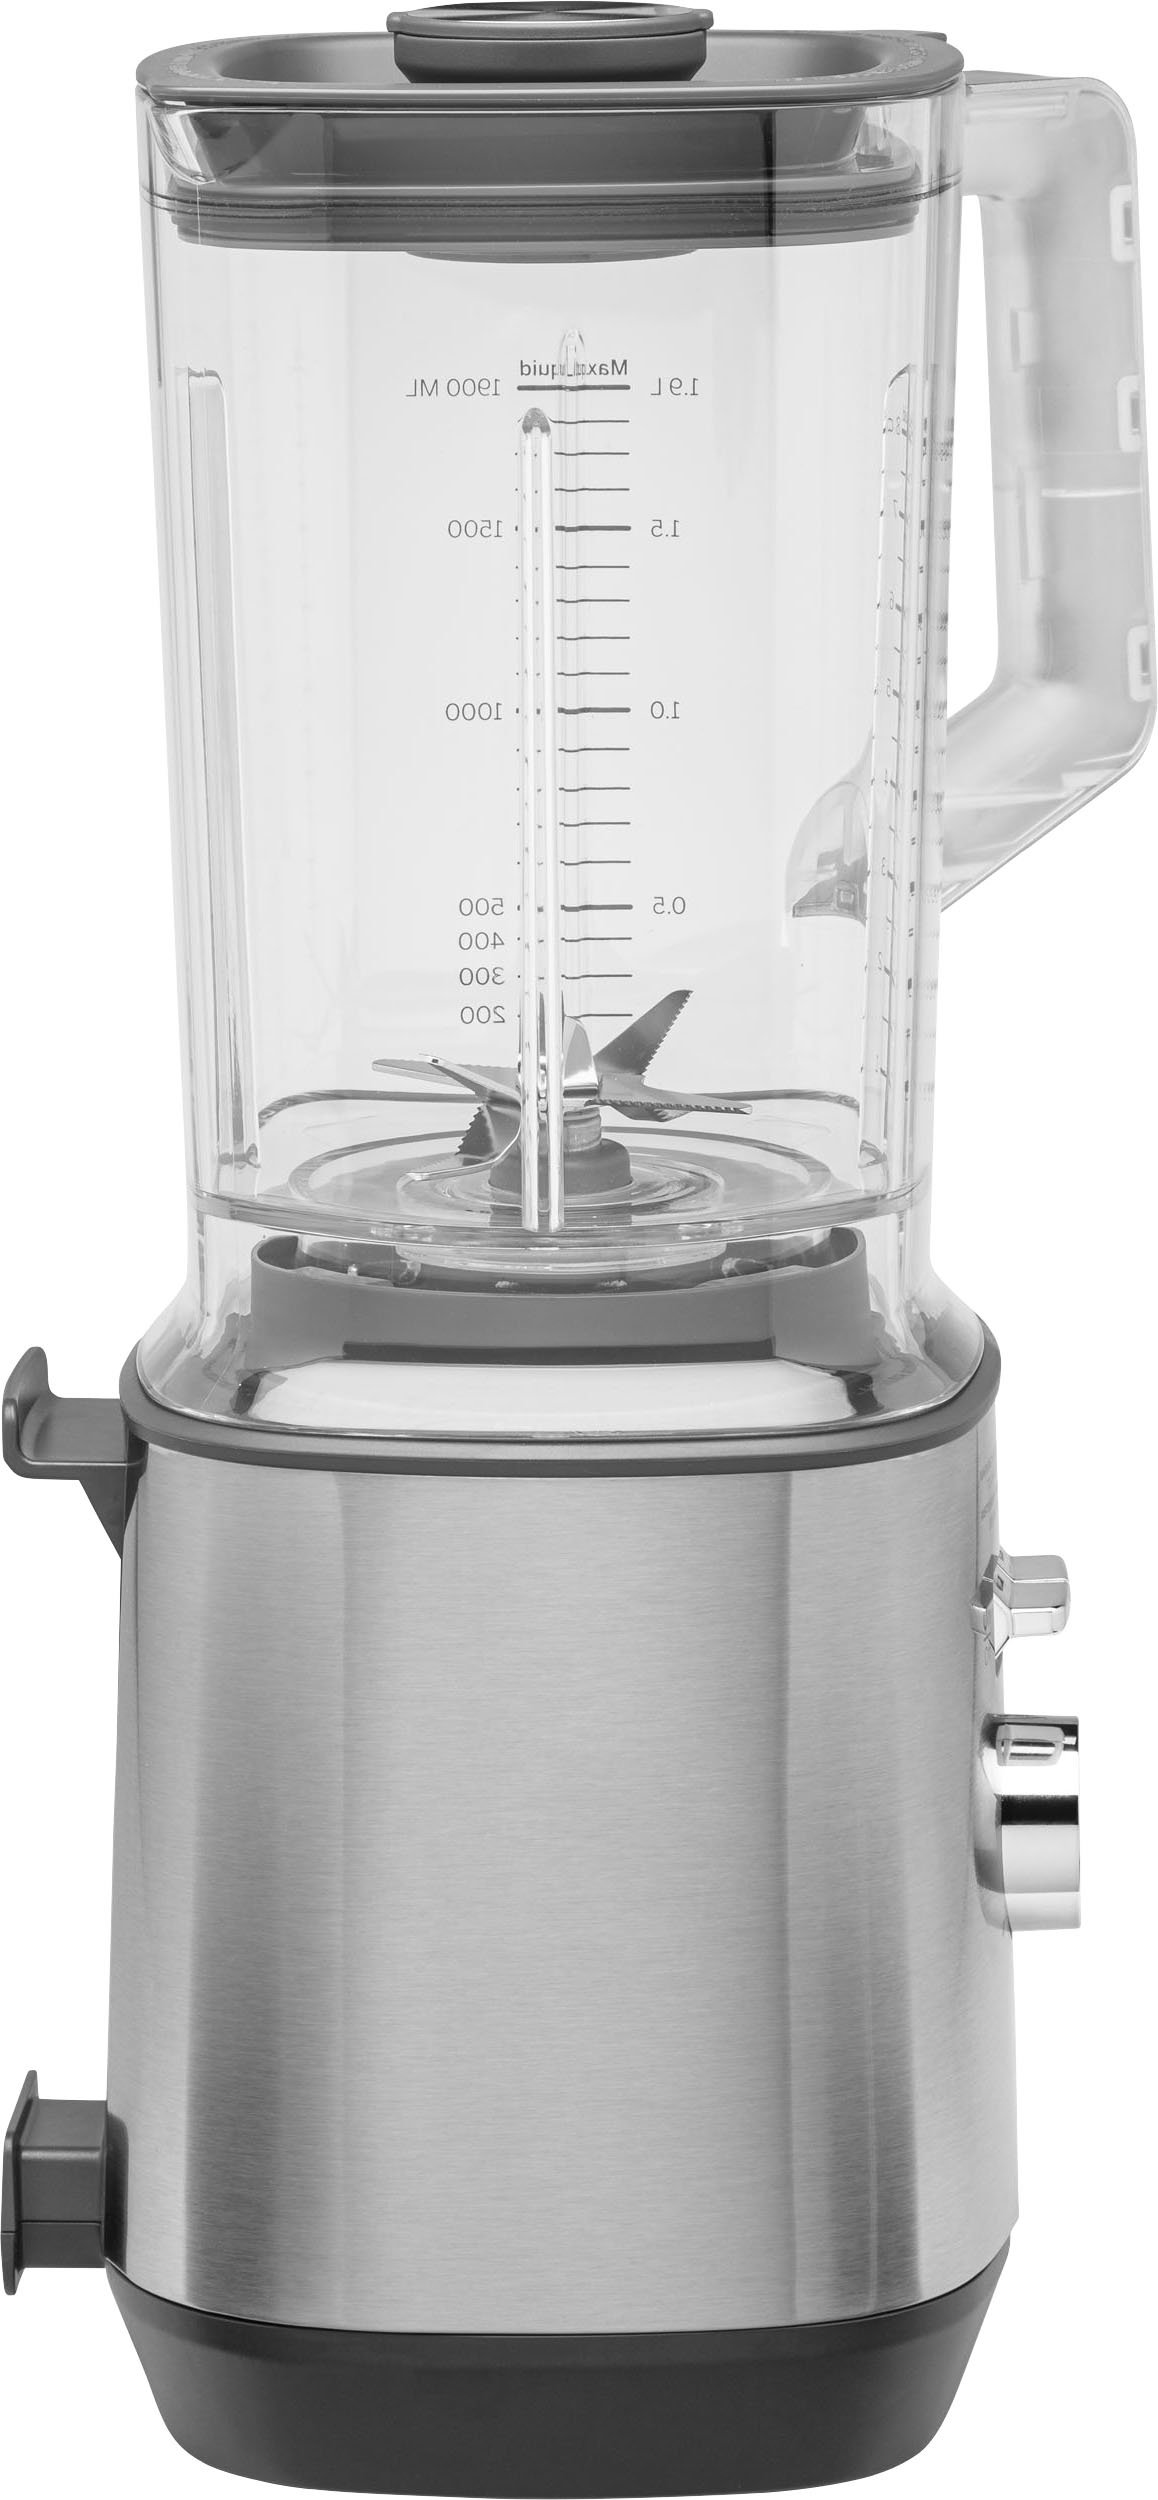 Angle View: Cuisinart - Citrus Juicer - Black Stainless